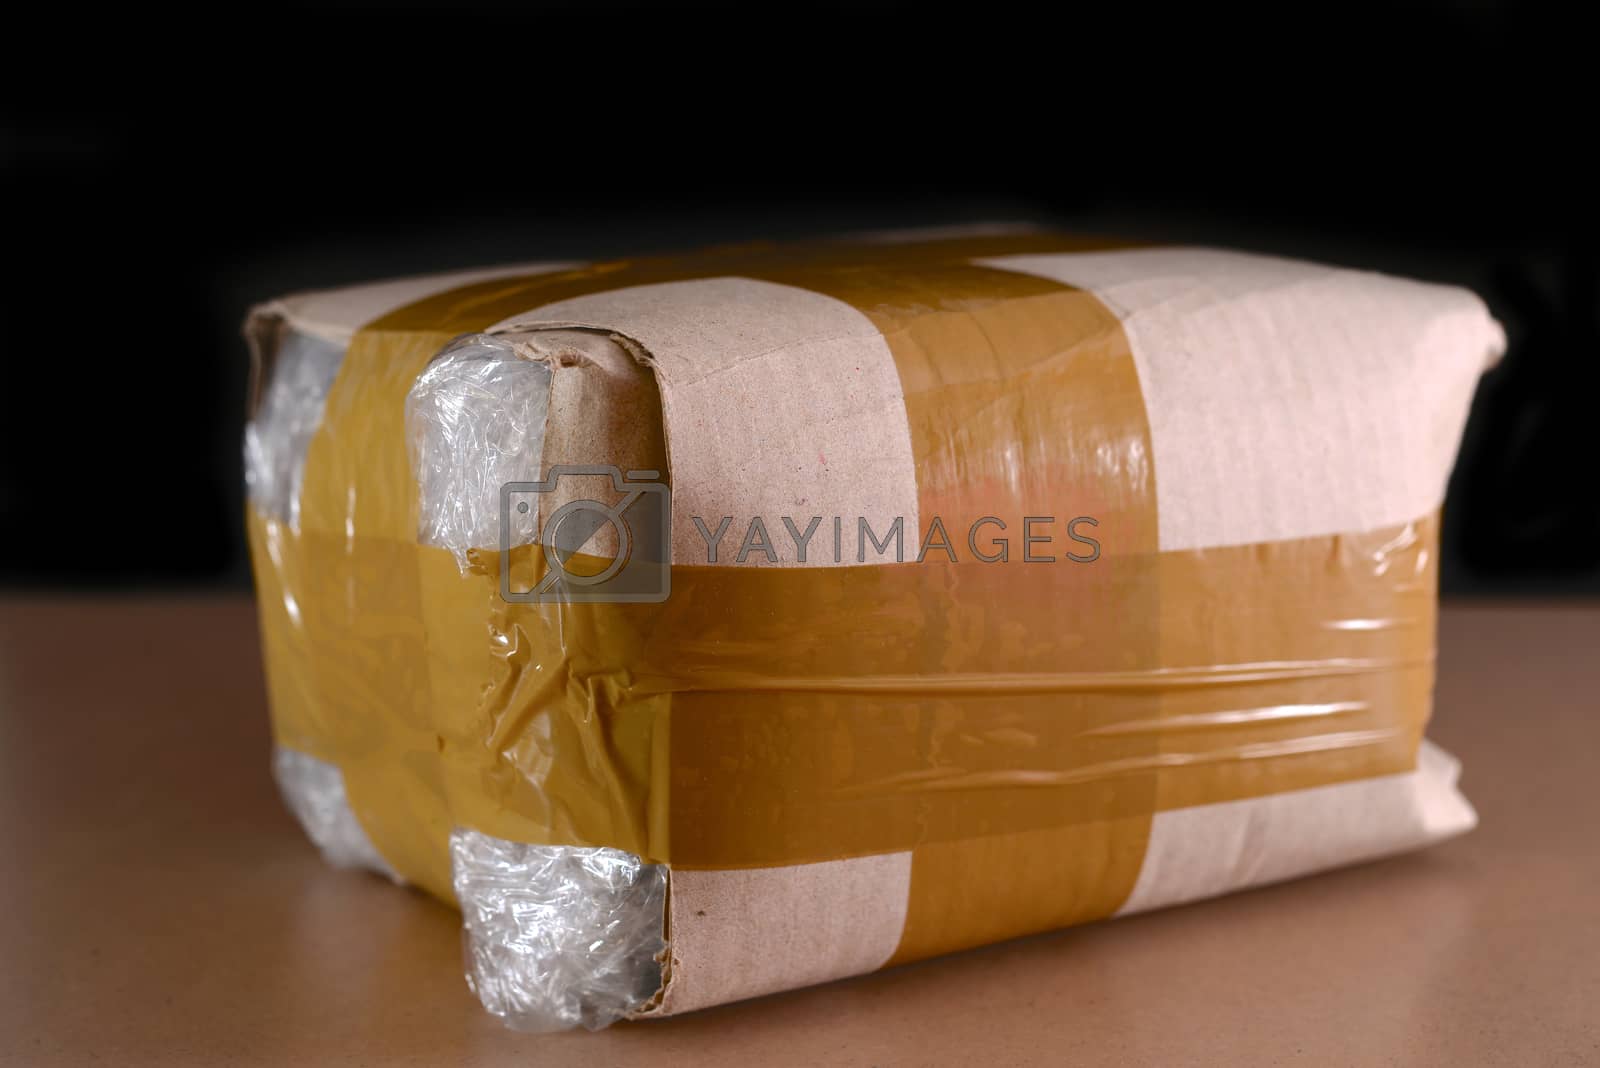 Royalty free image of easy packaging by antpkr